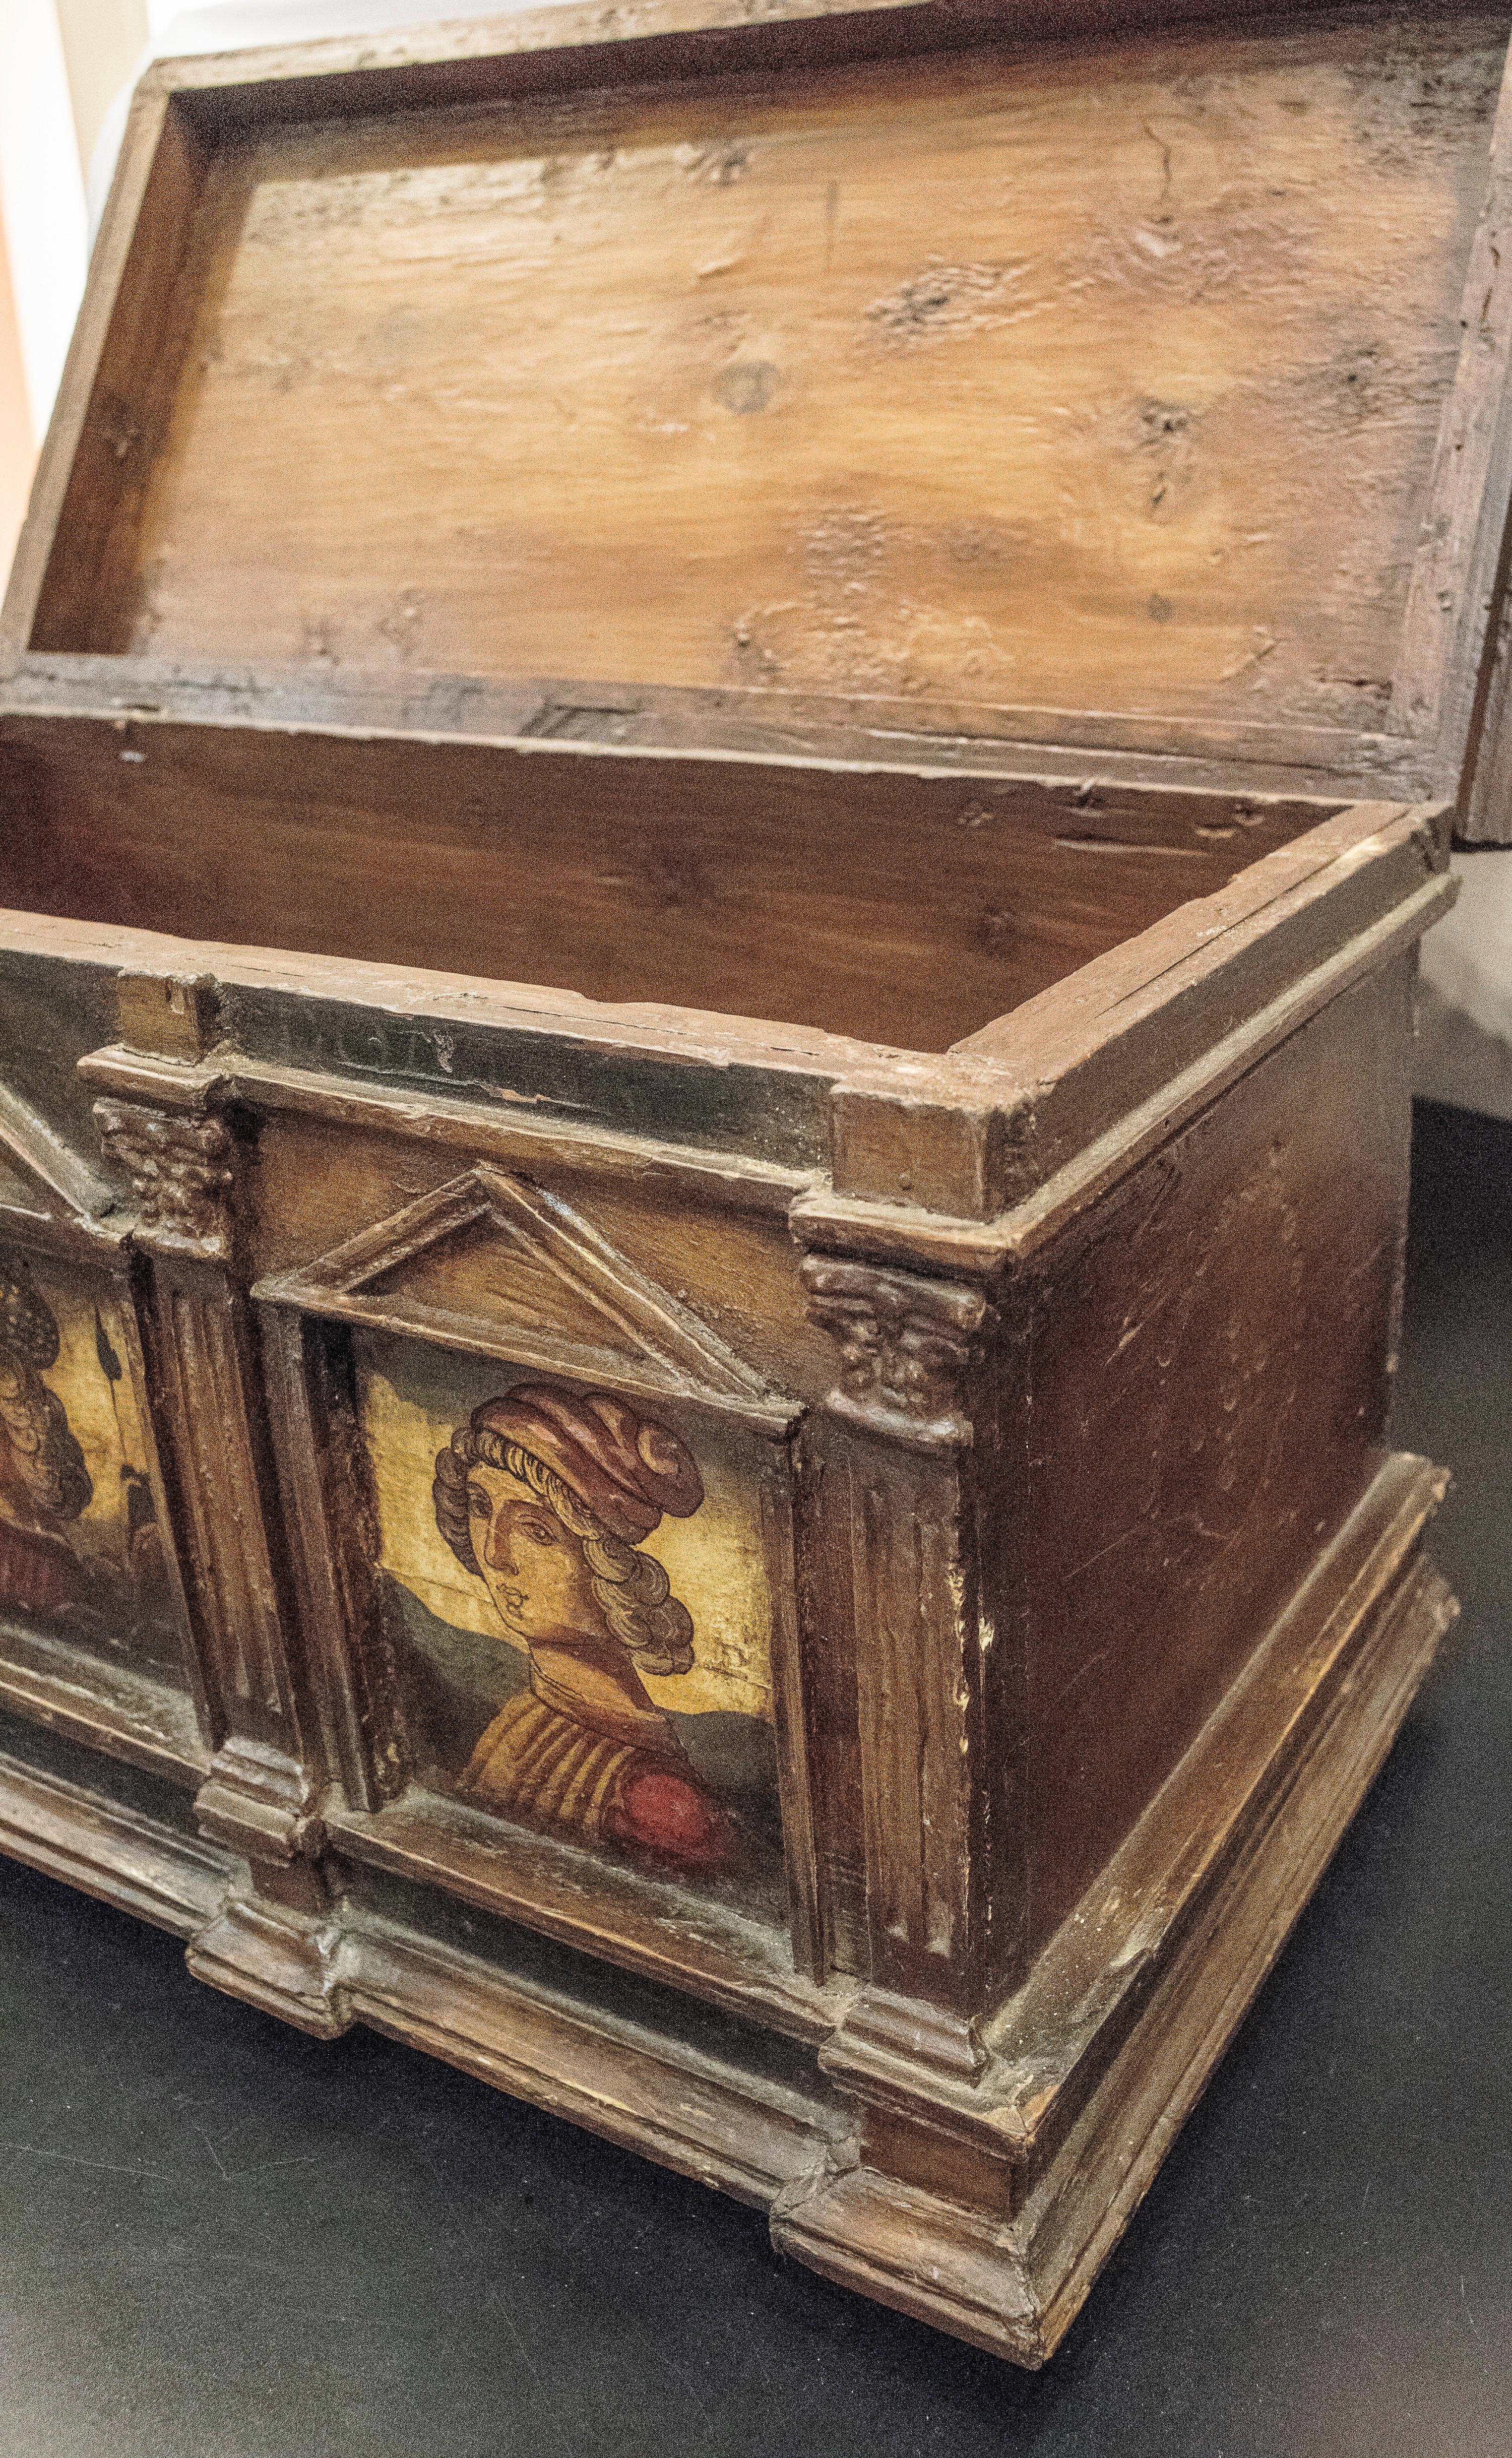 On of a kind 17th century Italian wood ark, from Florence. Front match with painted and polychrome scenes. From a private Italian collection.